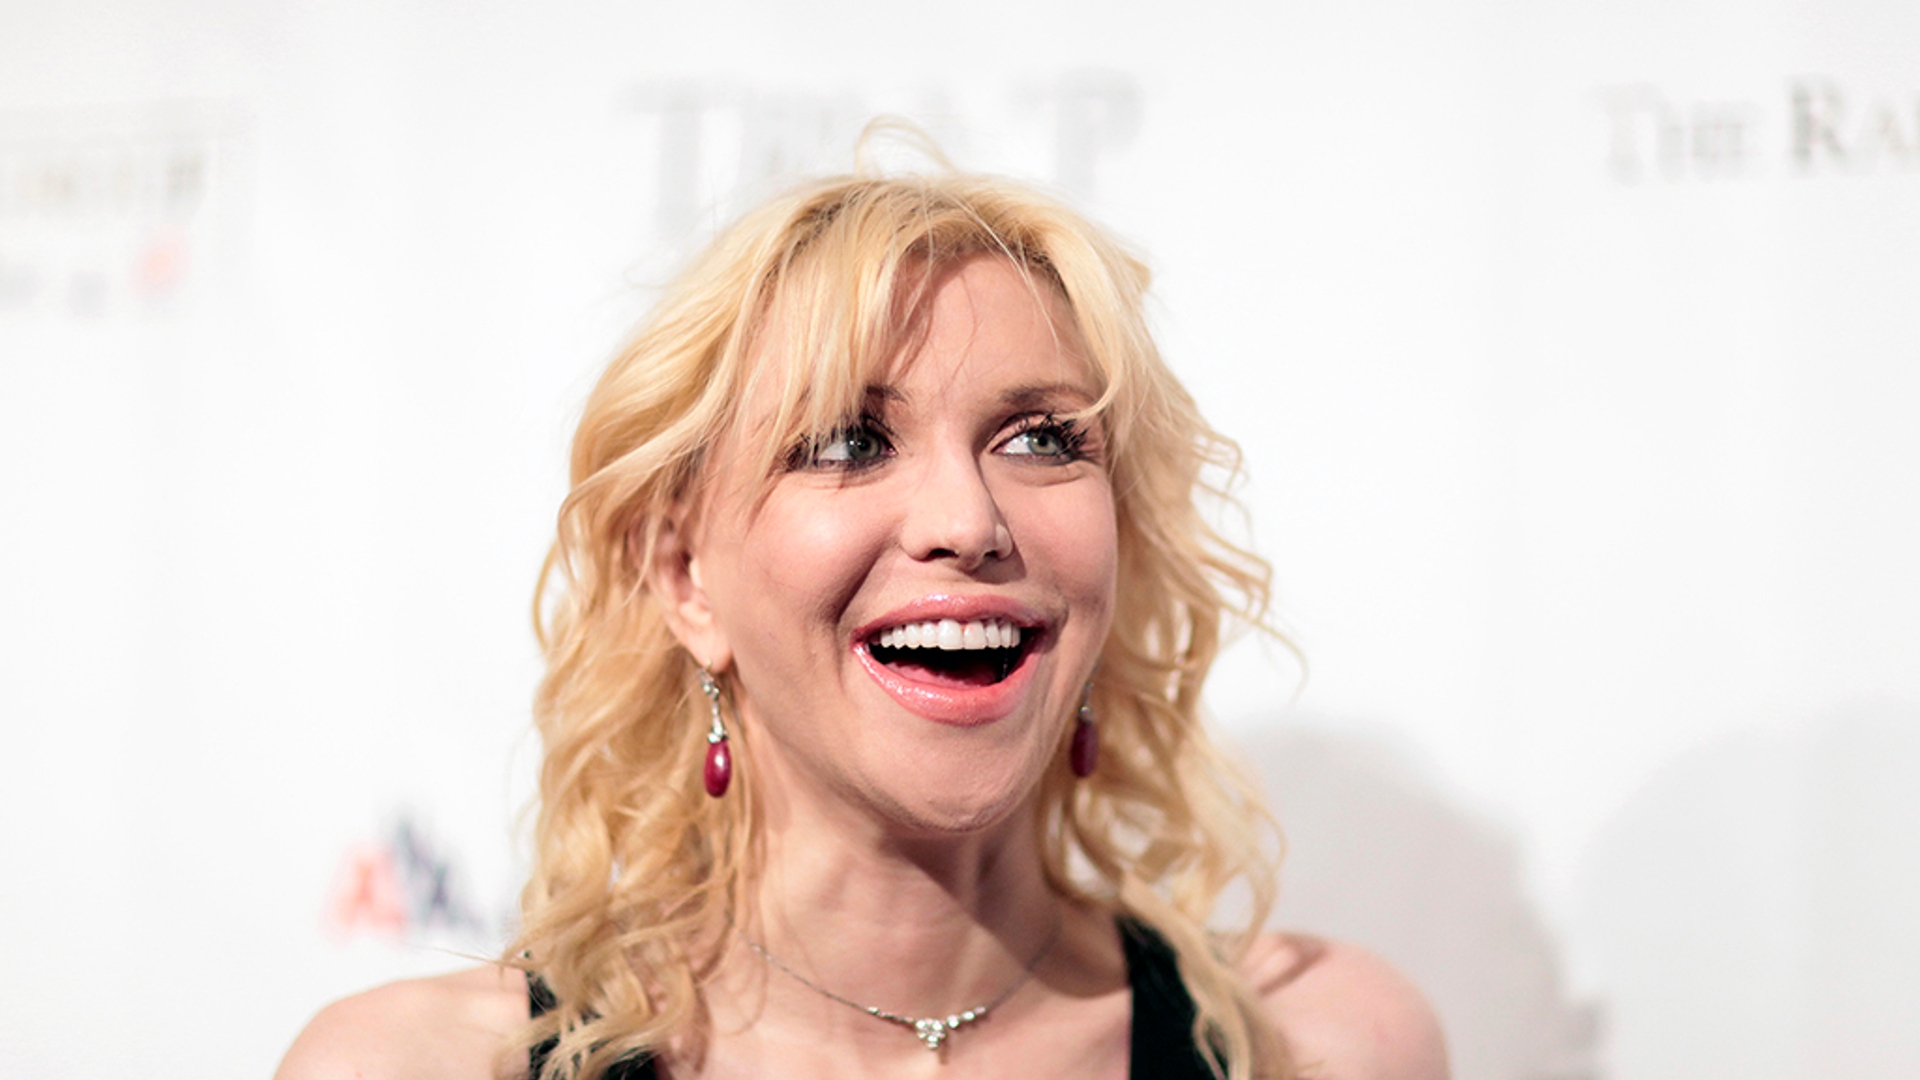 Actress Courtney Love arrives at "An Enduring Vision," a benefit dinner for the Elton John Aids Foundation in New York